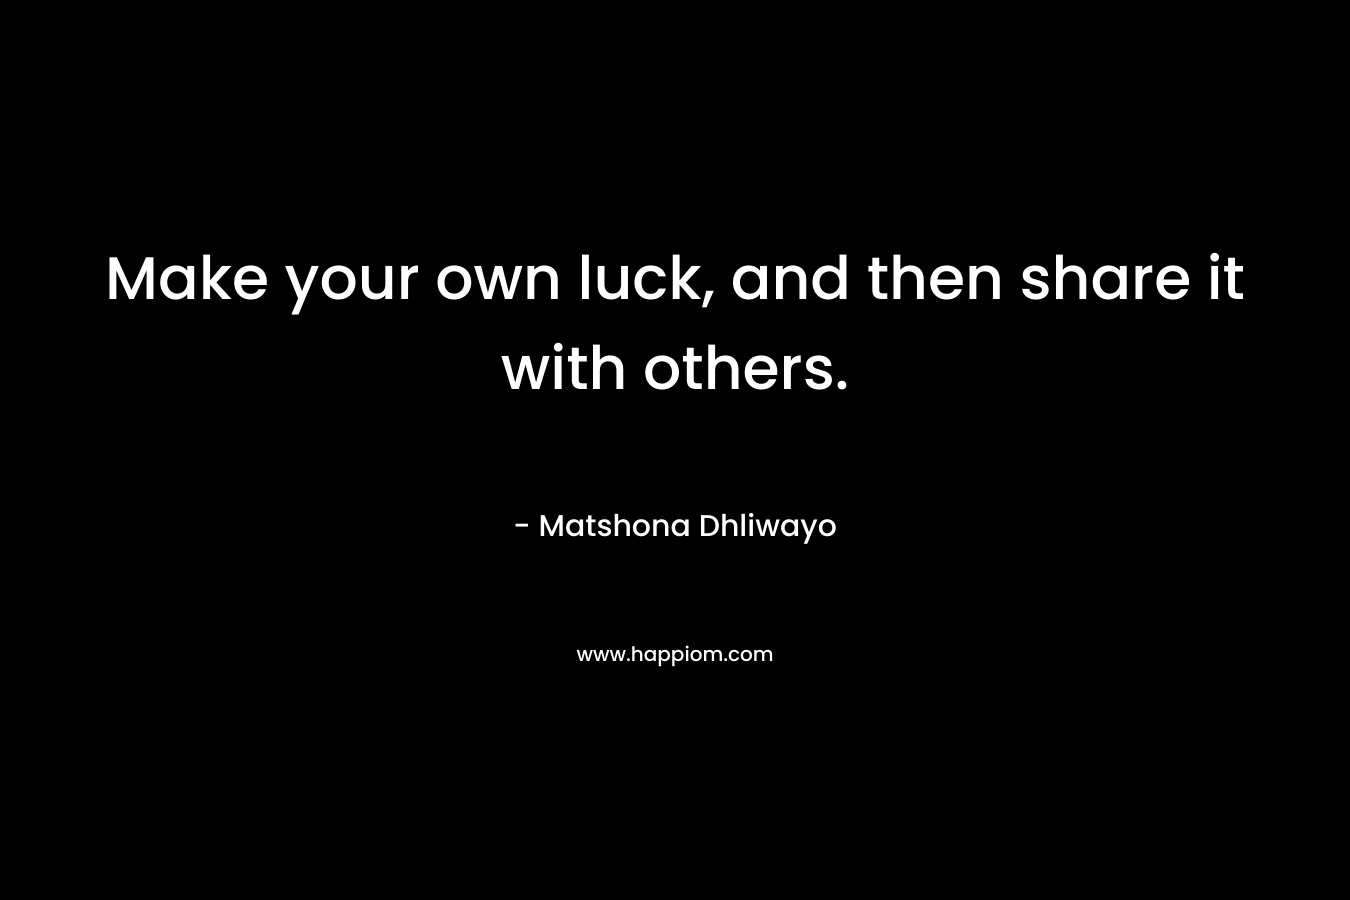 Make your own luck, and then share it with others.